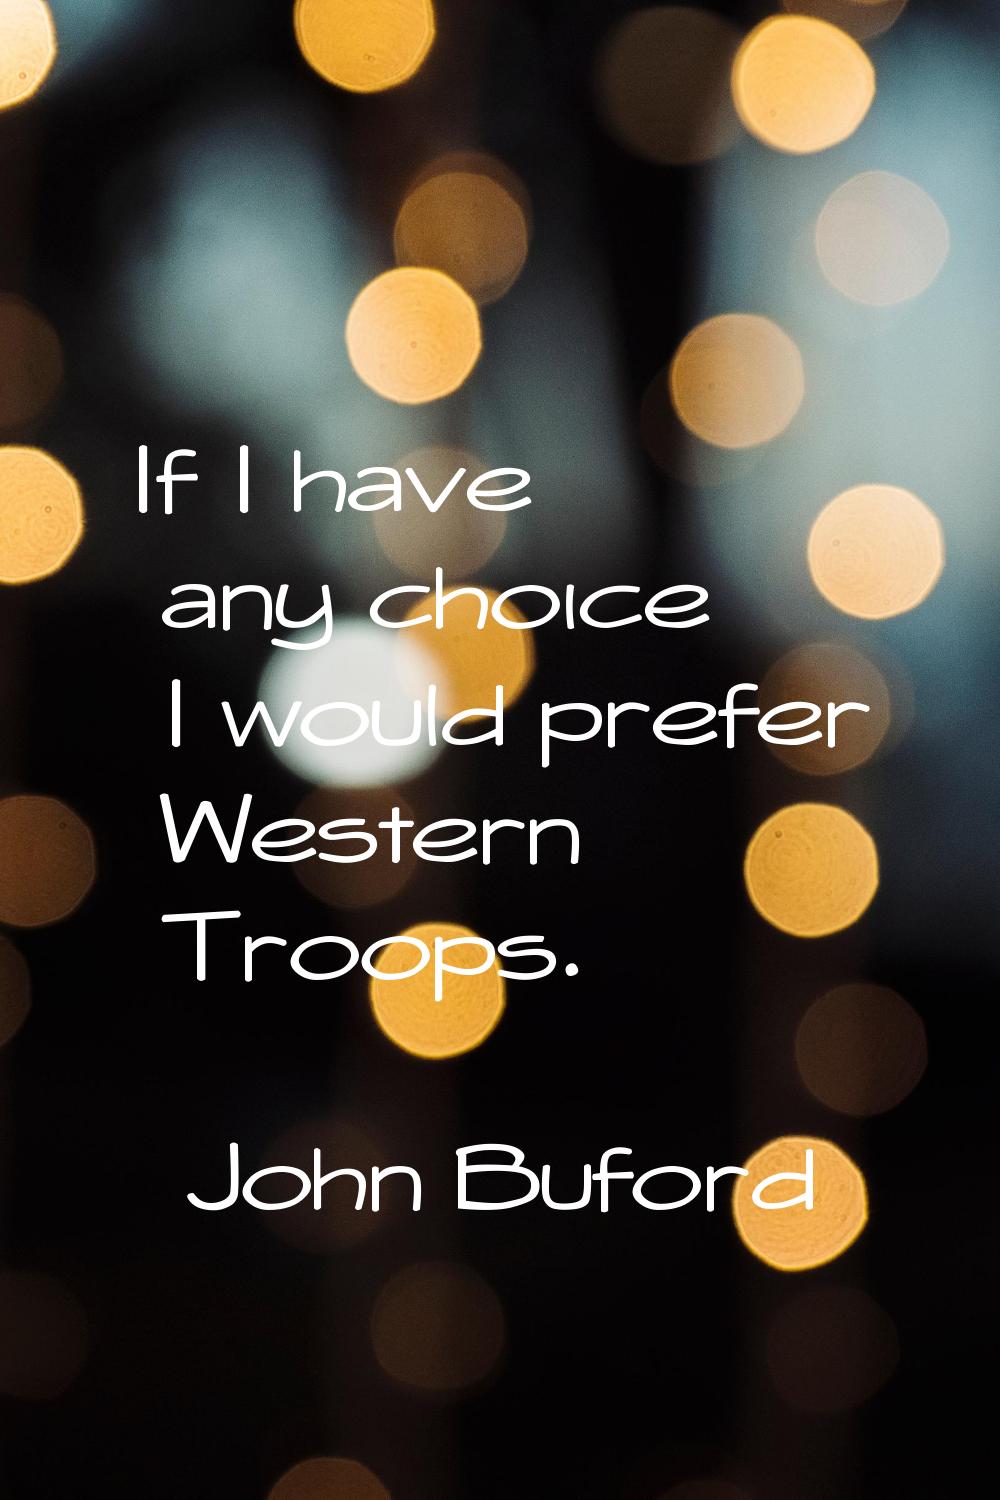 If I have any choice I would prefer Western Troops.